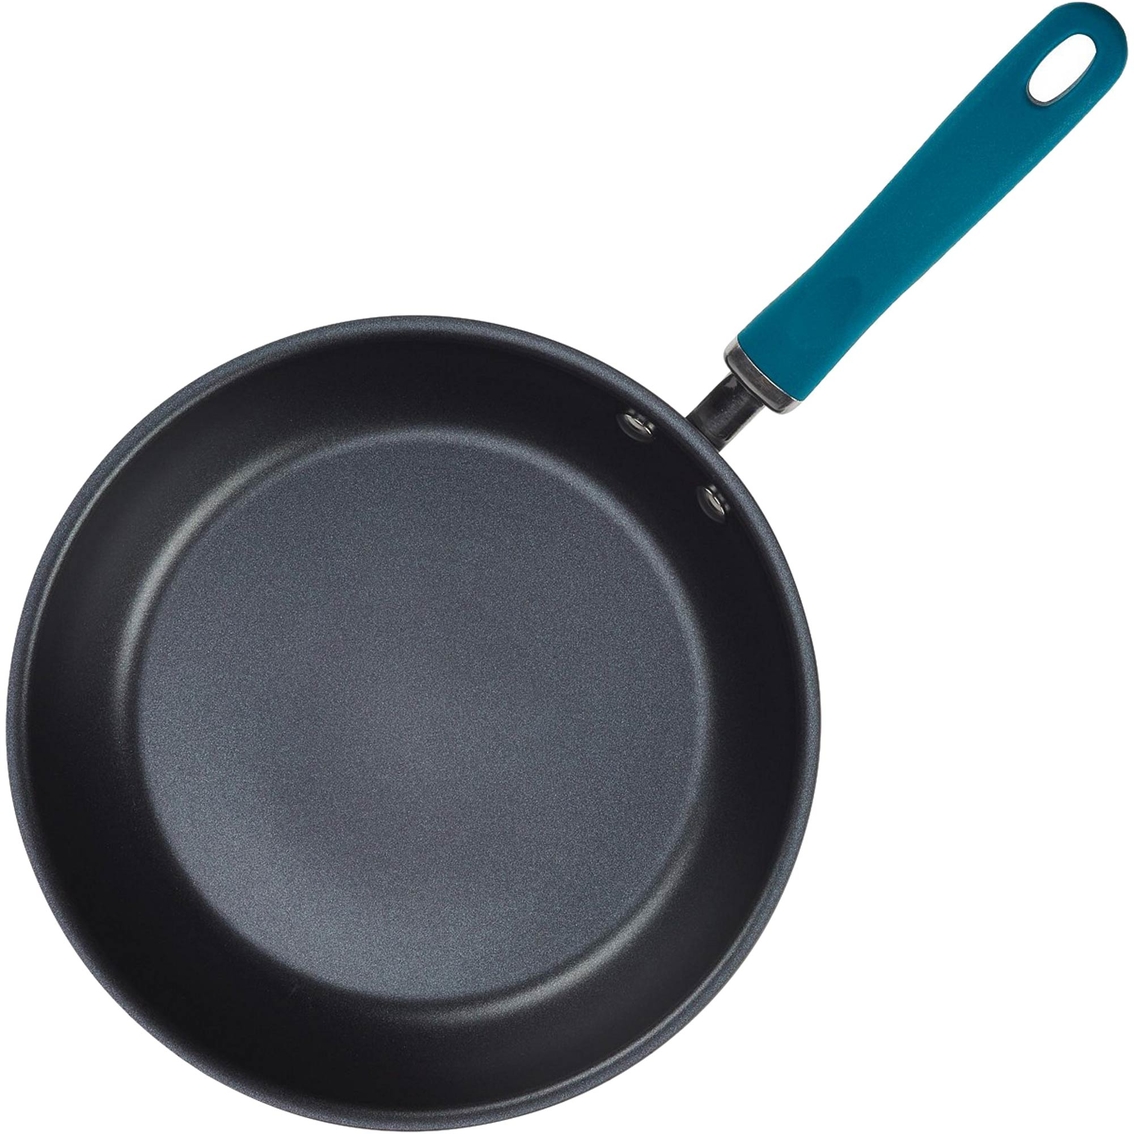 Rachael Ray Create Delicious Hard Anodized Aluminum Nonstick 11 pc. Cookware Set - Image 4 of 7